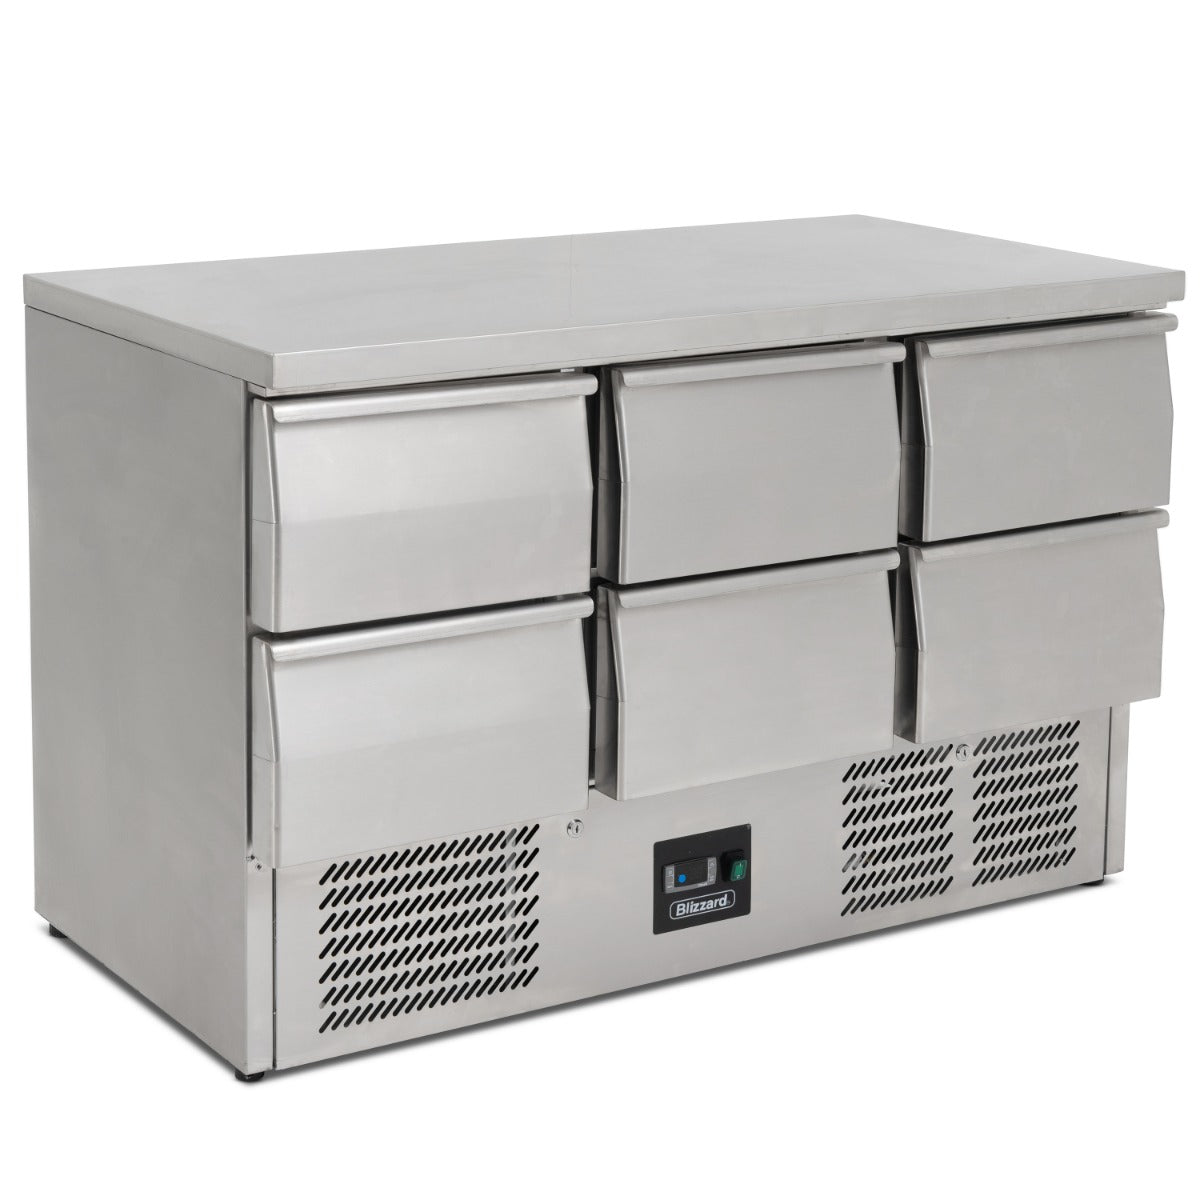 Blizzard 6 Drawer Compact Gastronorm Counter 368L